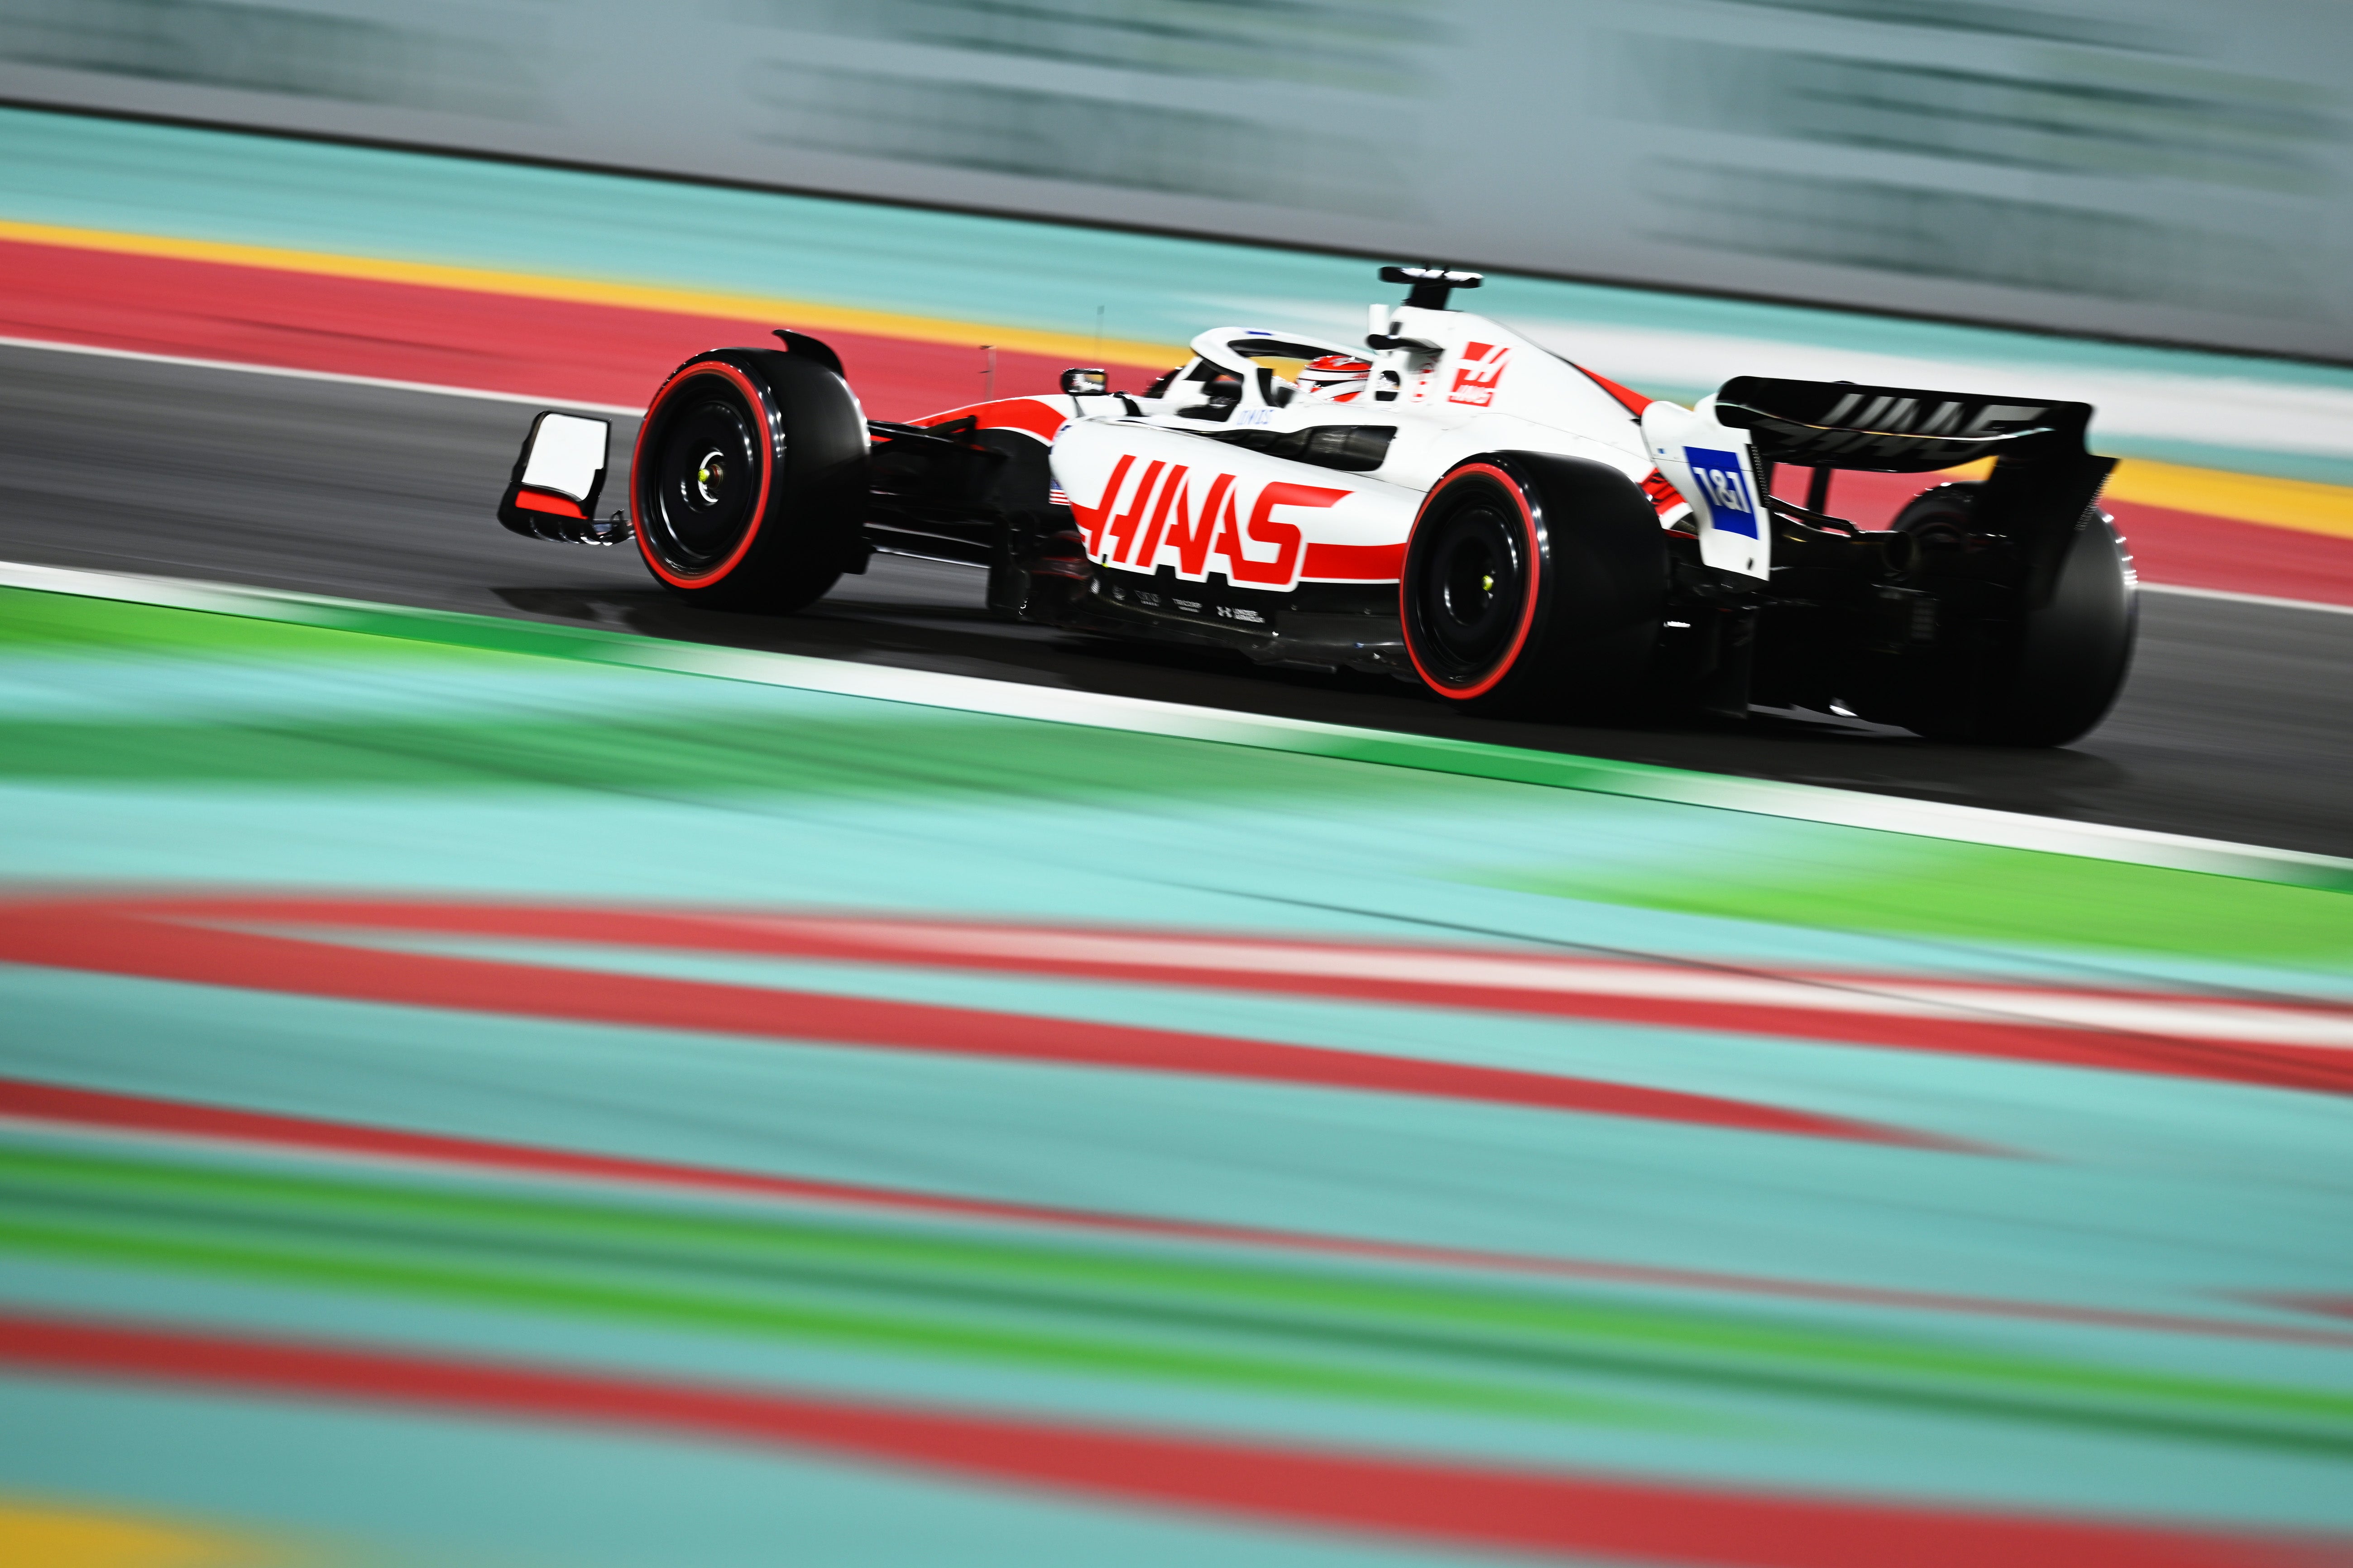 Haas are enjoying an excellent start to the 2022 Formula 1 season.